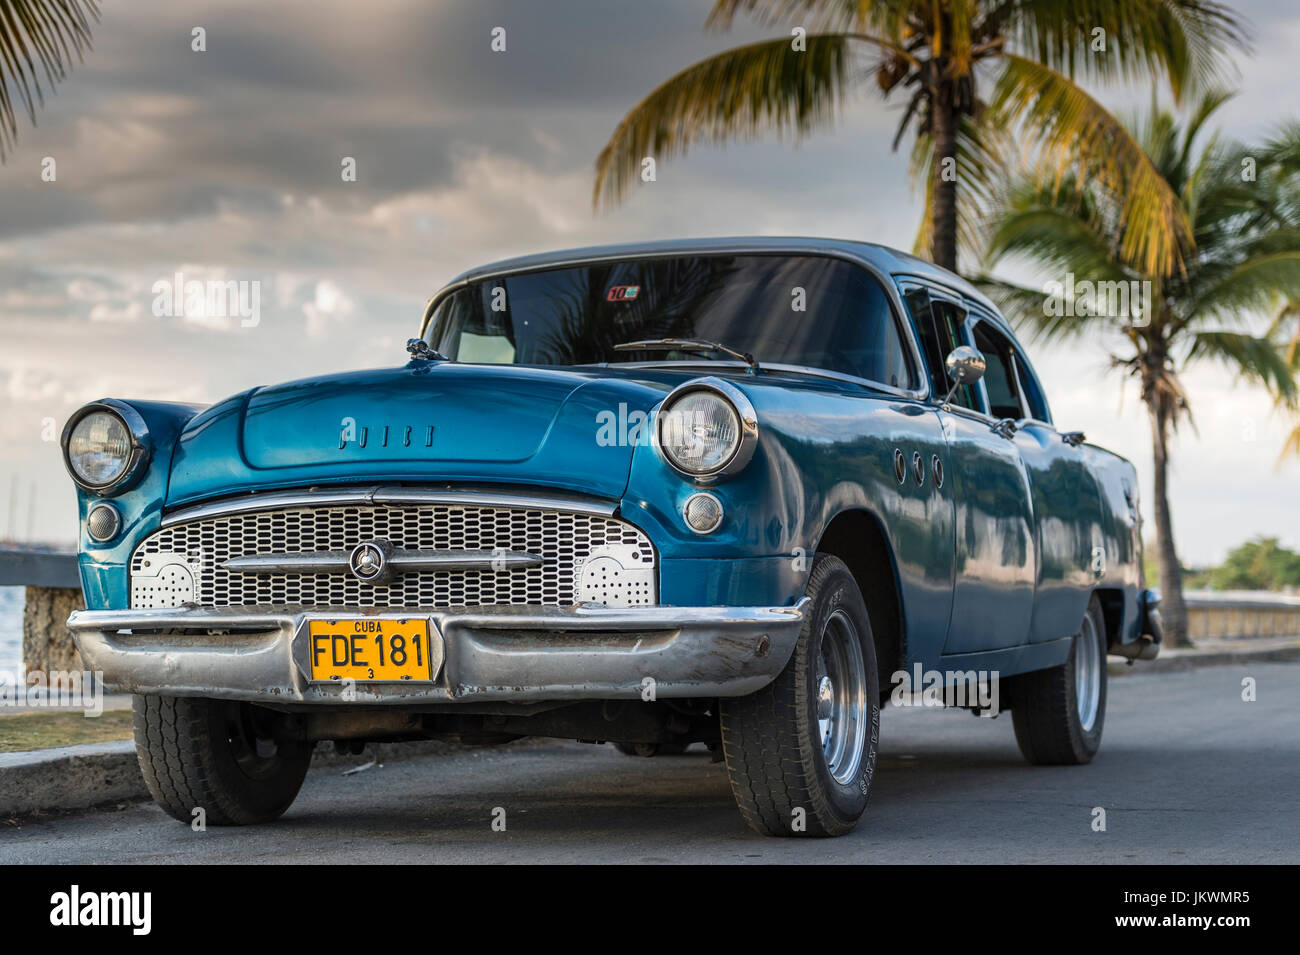 Buick - classic car in Cuba. Owners of classic cars take great pride in maintaining and caring for these old cars. Embargos have limited new cars. Stock Photo